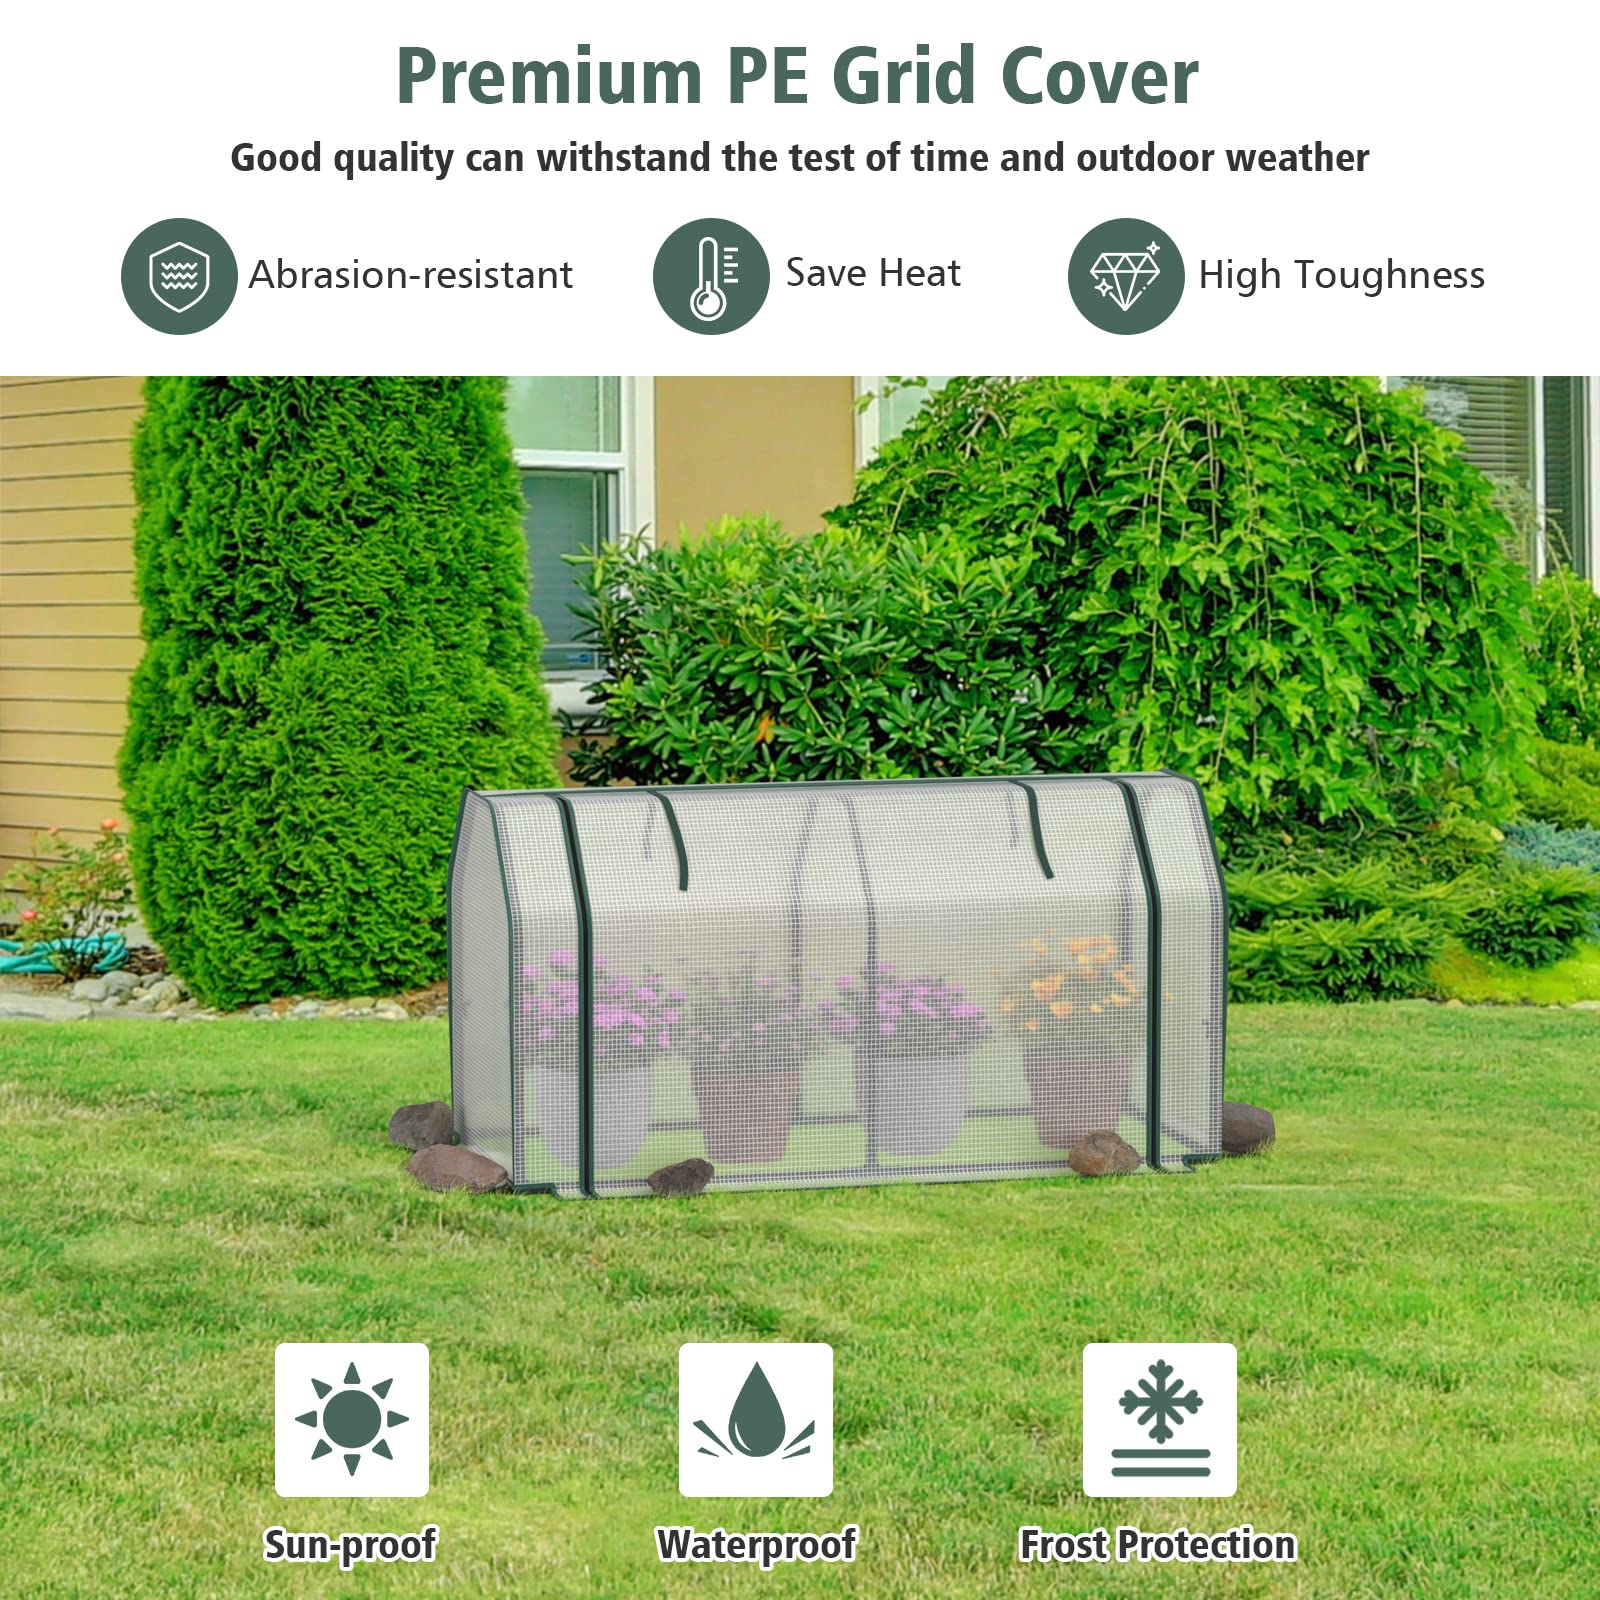 Giantex Mini Portable Greenhouse - for Raised Garden Bed, 47.5”x 21.5”x 24” Green House with PE Cover Zipper Door